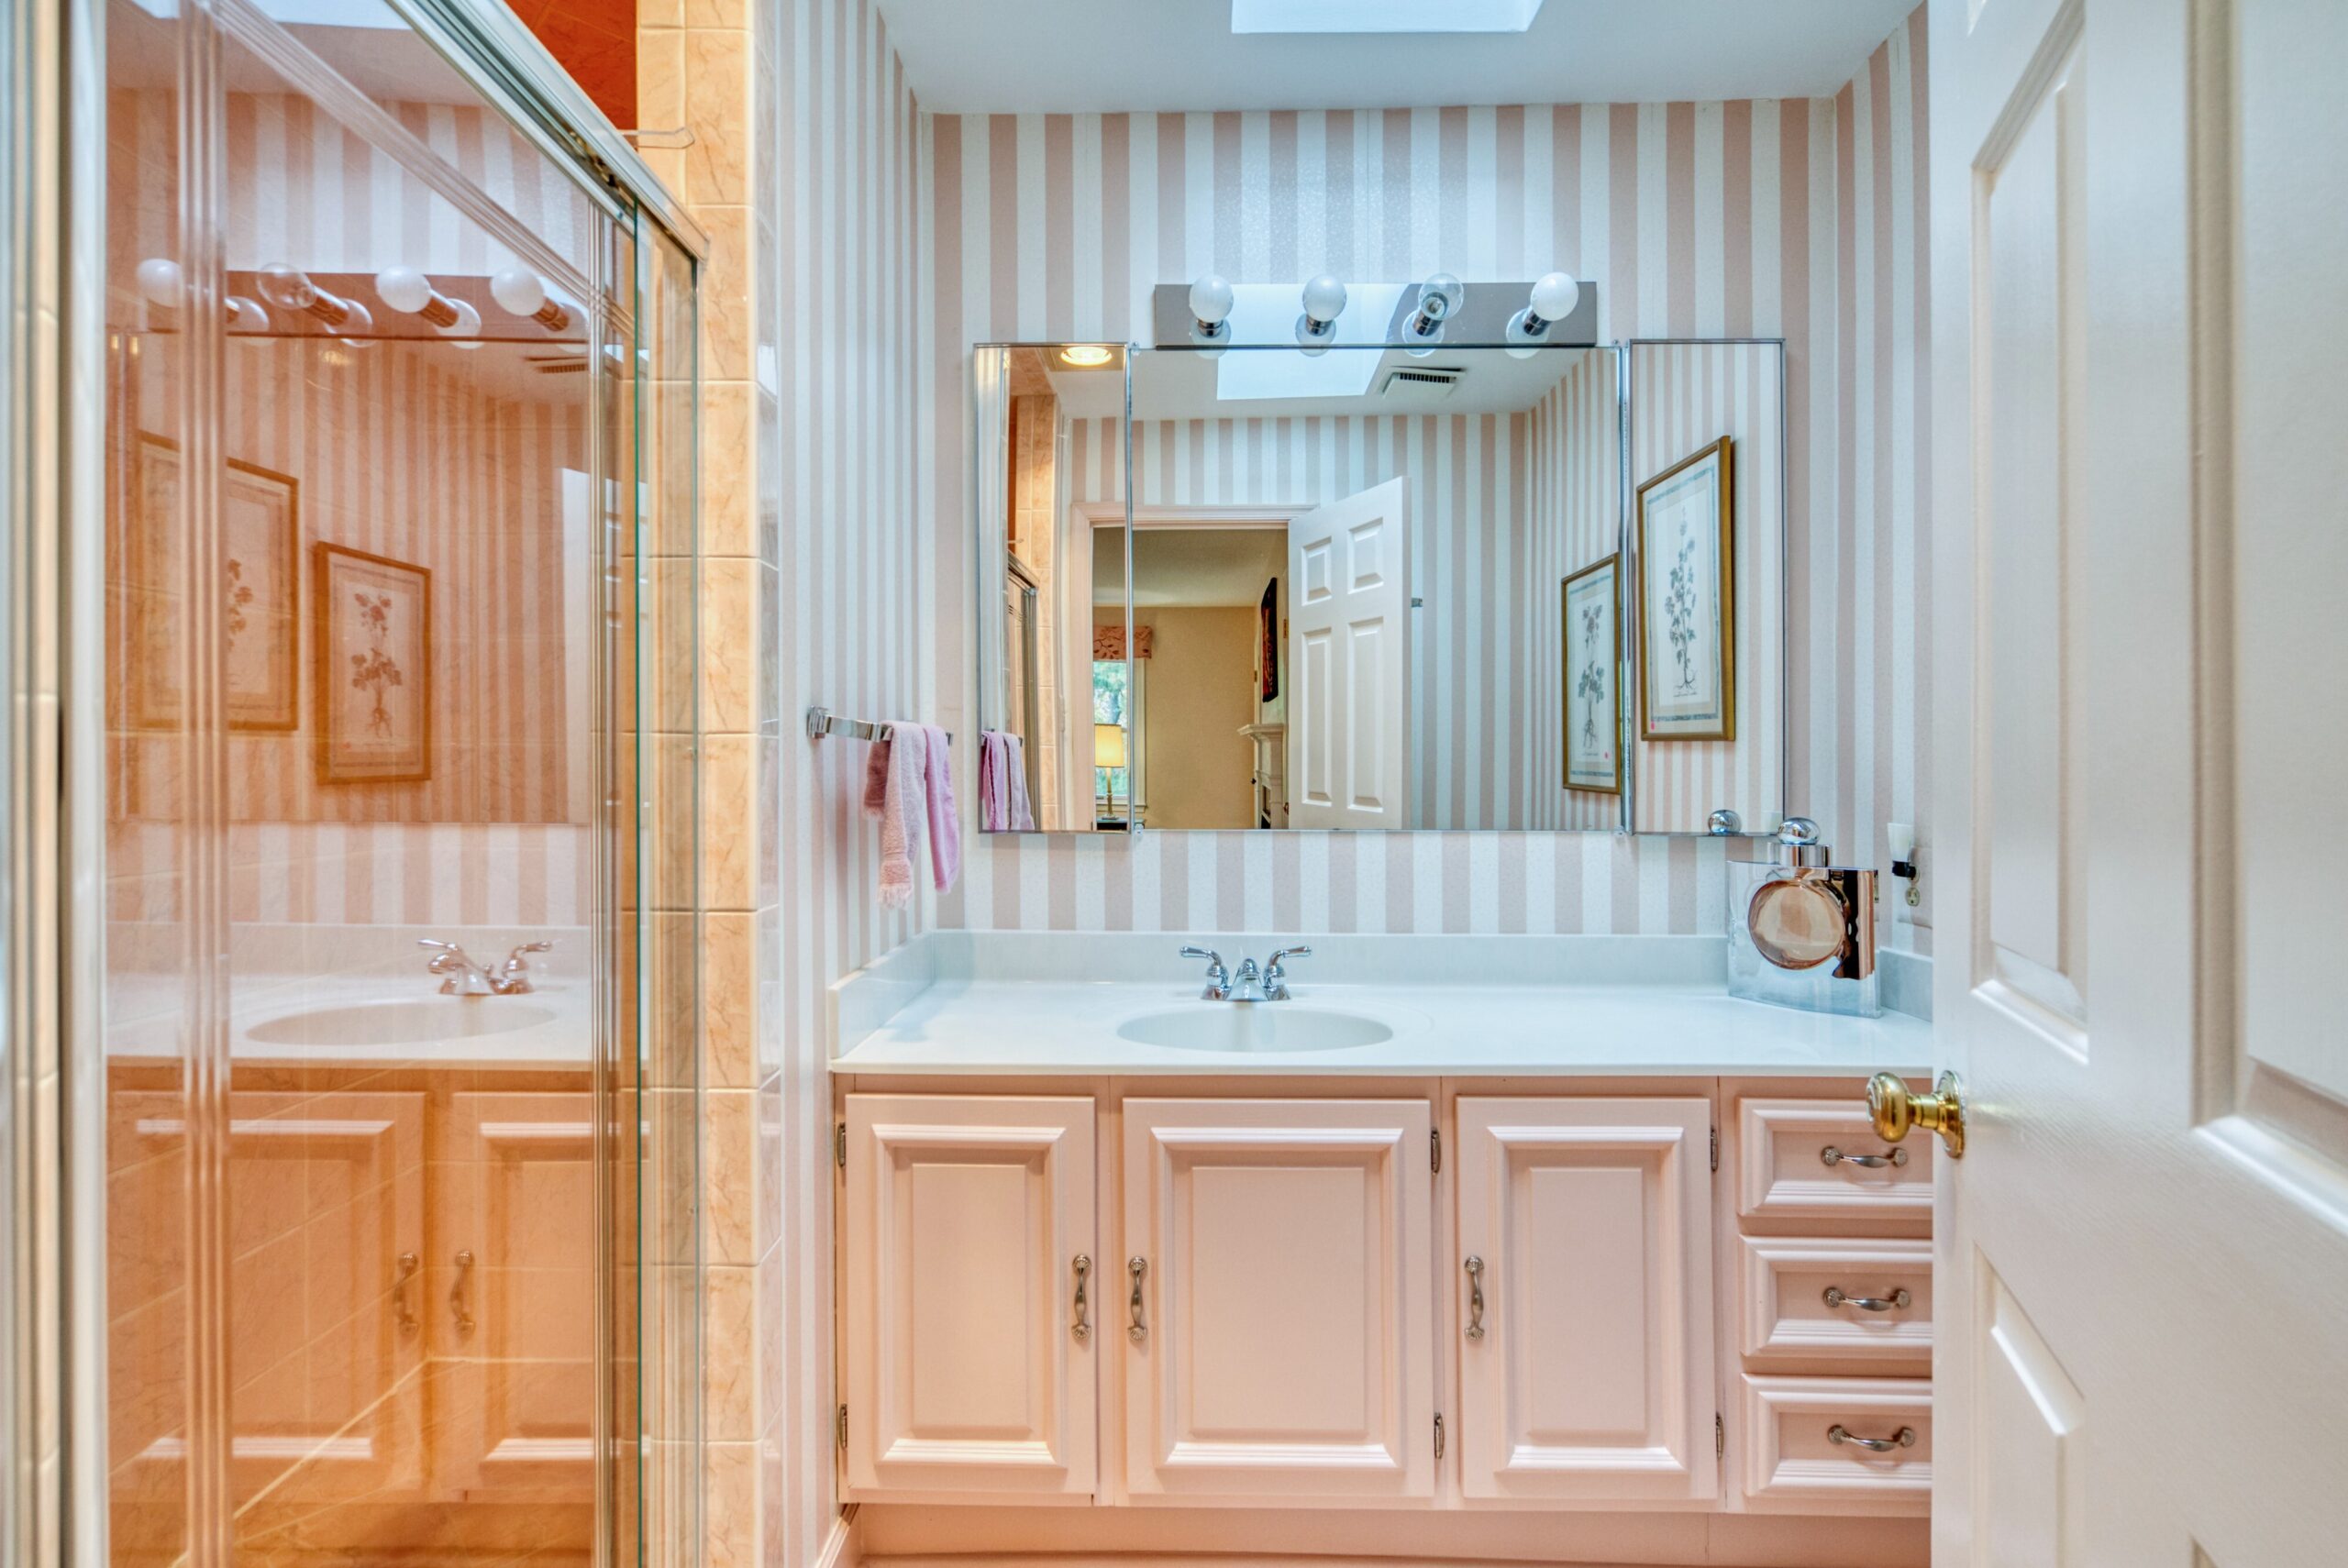 Interior professional photo of 1324 Skipwith Road - showing a full bathroom in antique pink cabinets, and white and pink wallpaper